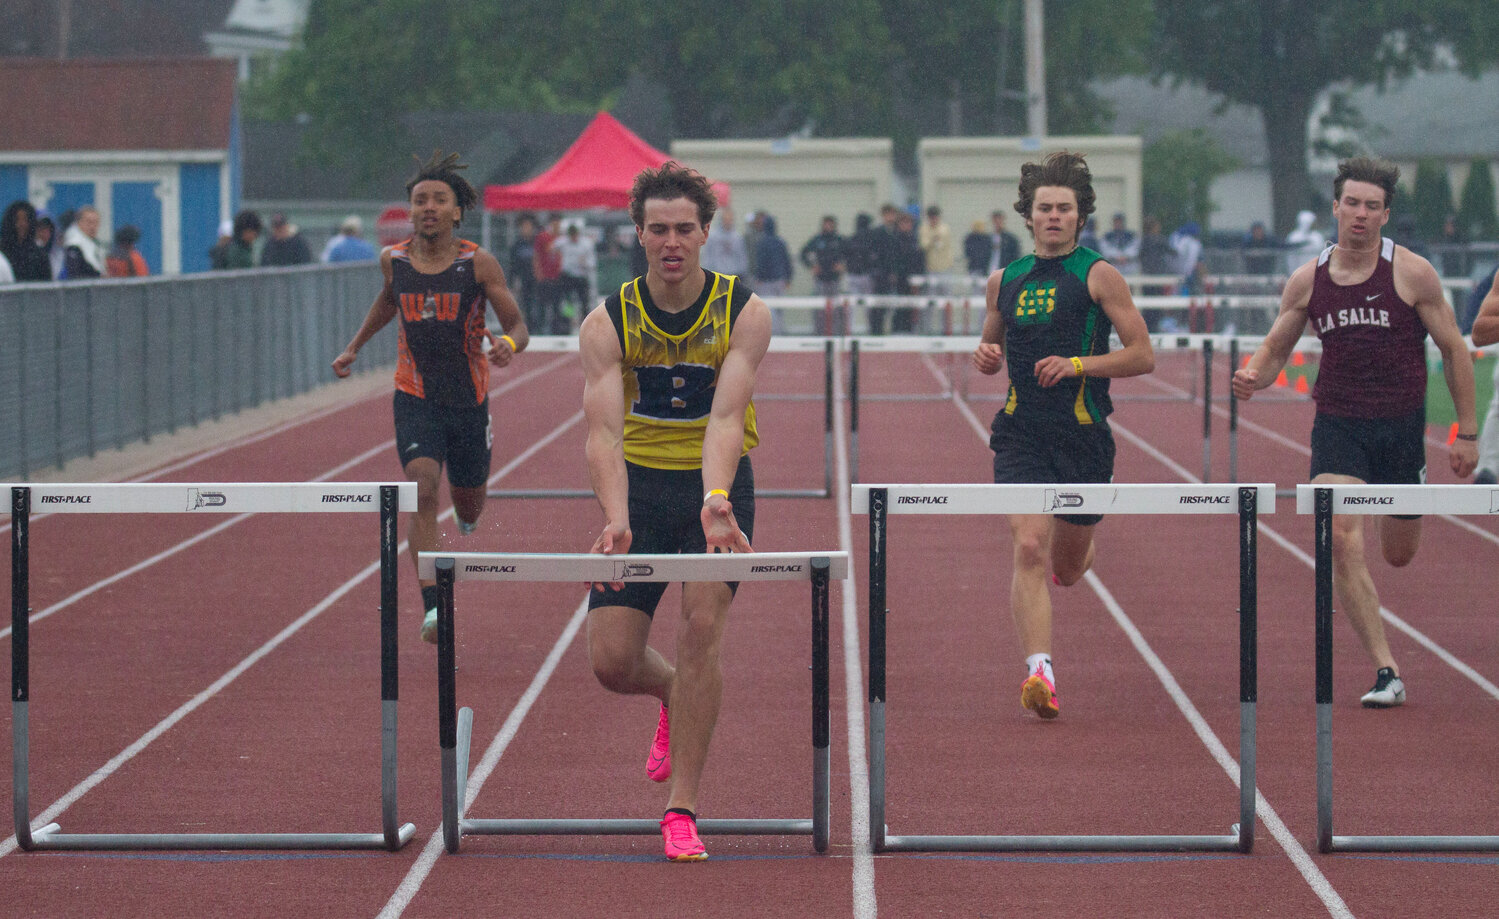 Barrington's Ethan Knight pushes over a hurdle in the 300-meter hurdles race.